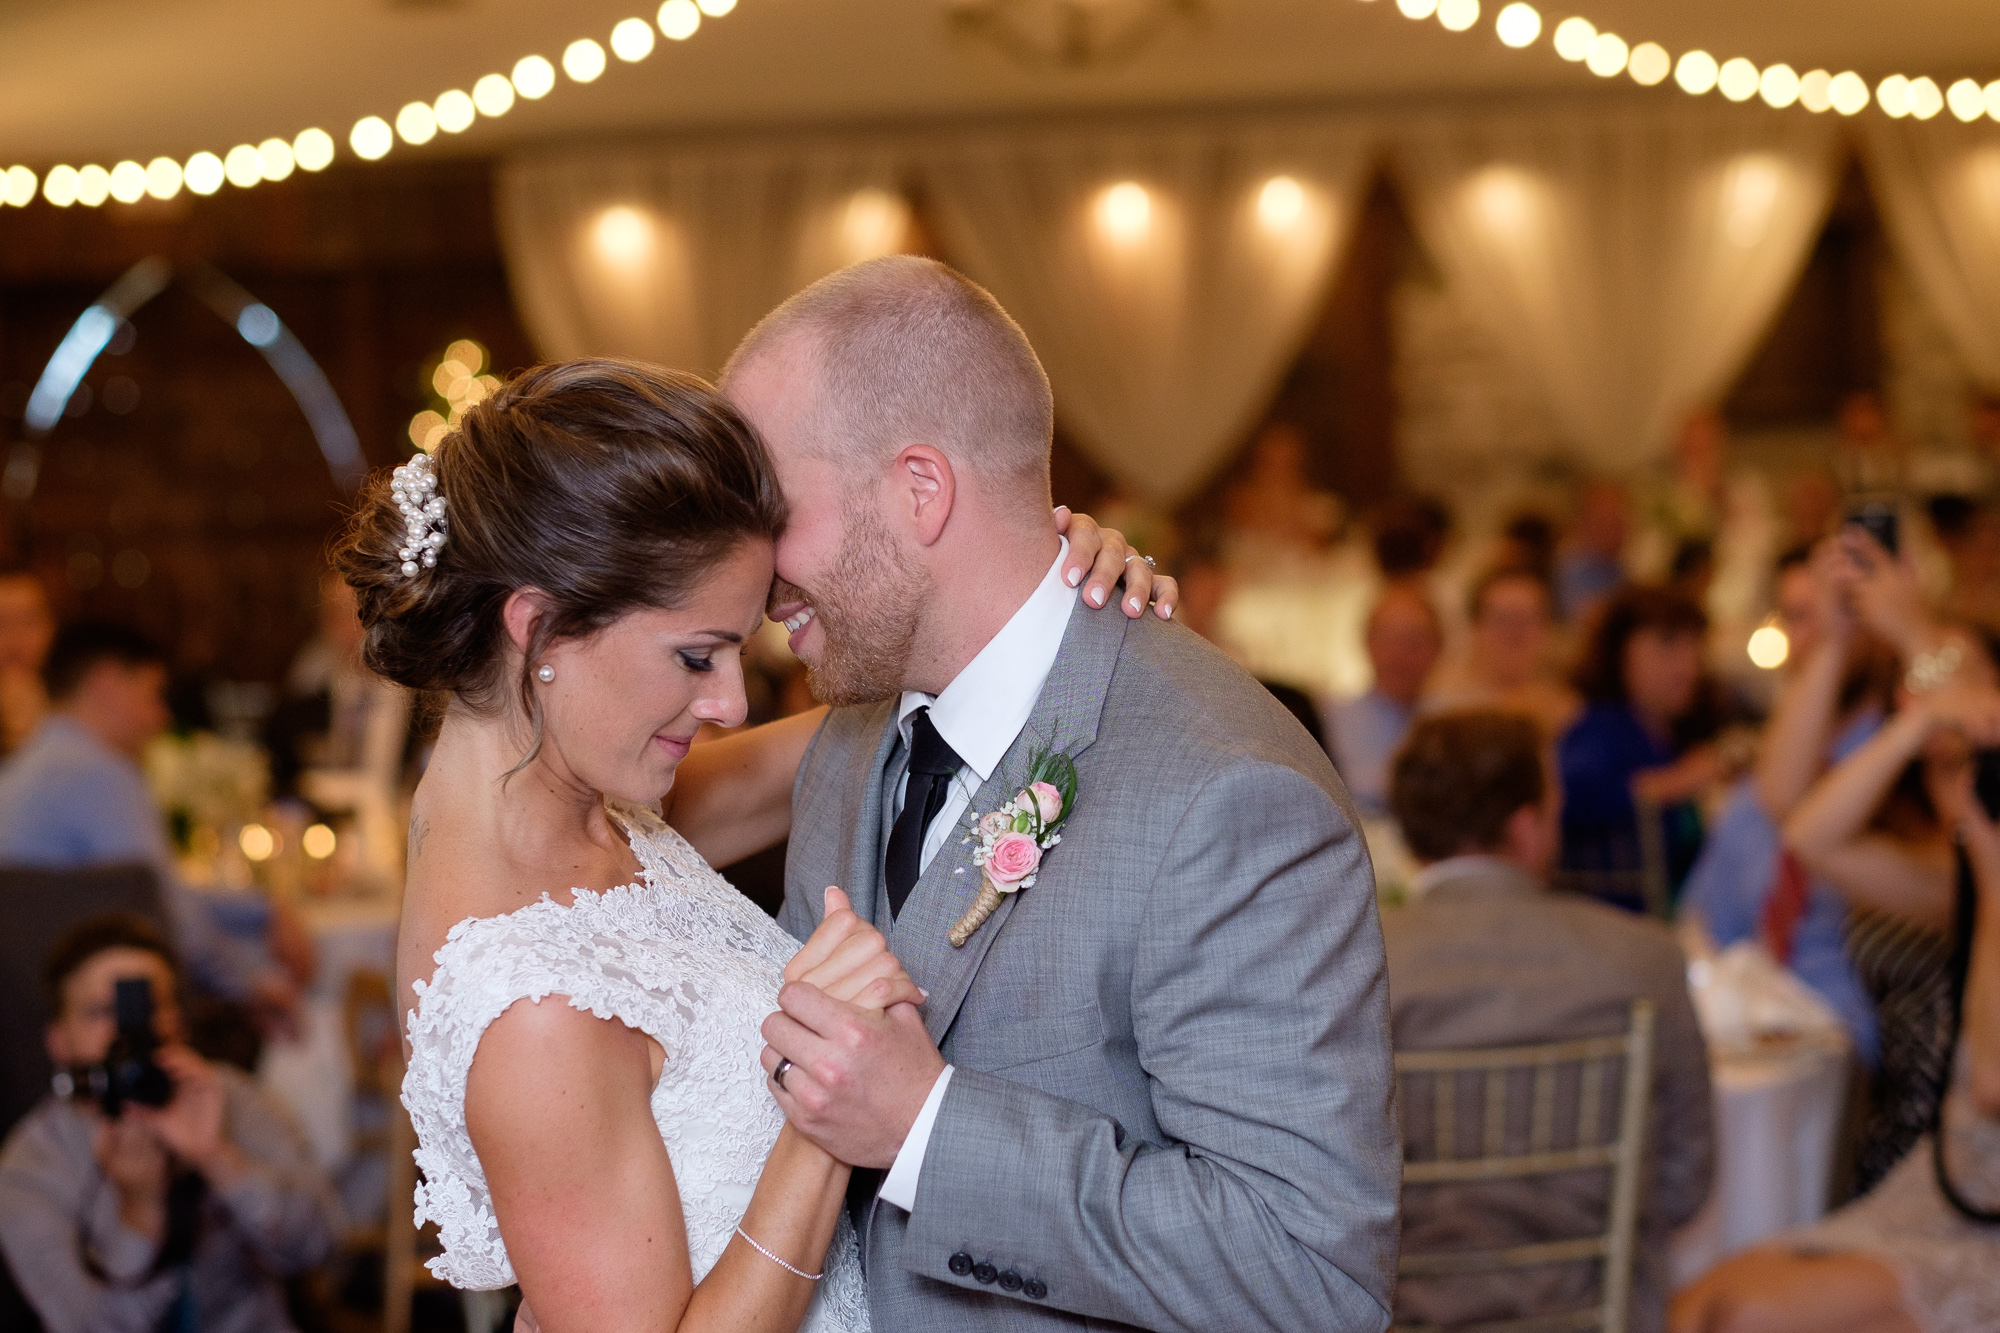  A photograph of the first dance during the reception from Rebecca + Jeff's wedding at the Hessenland Inn. 